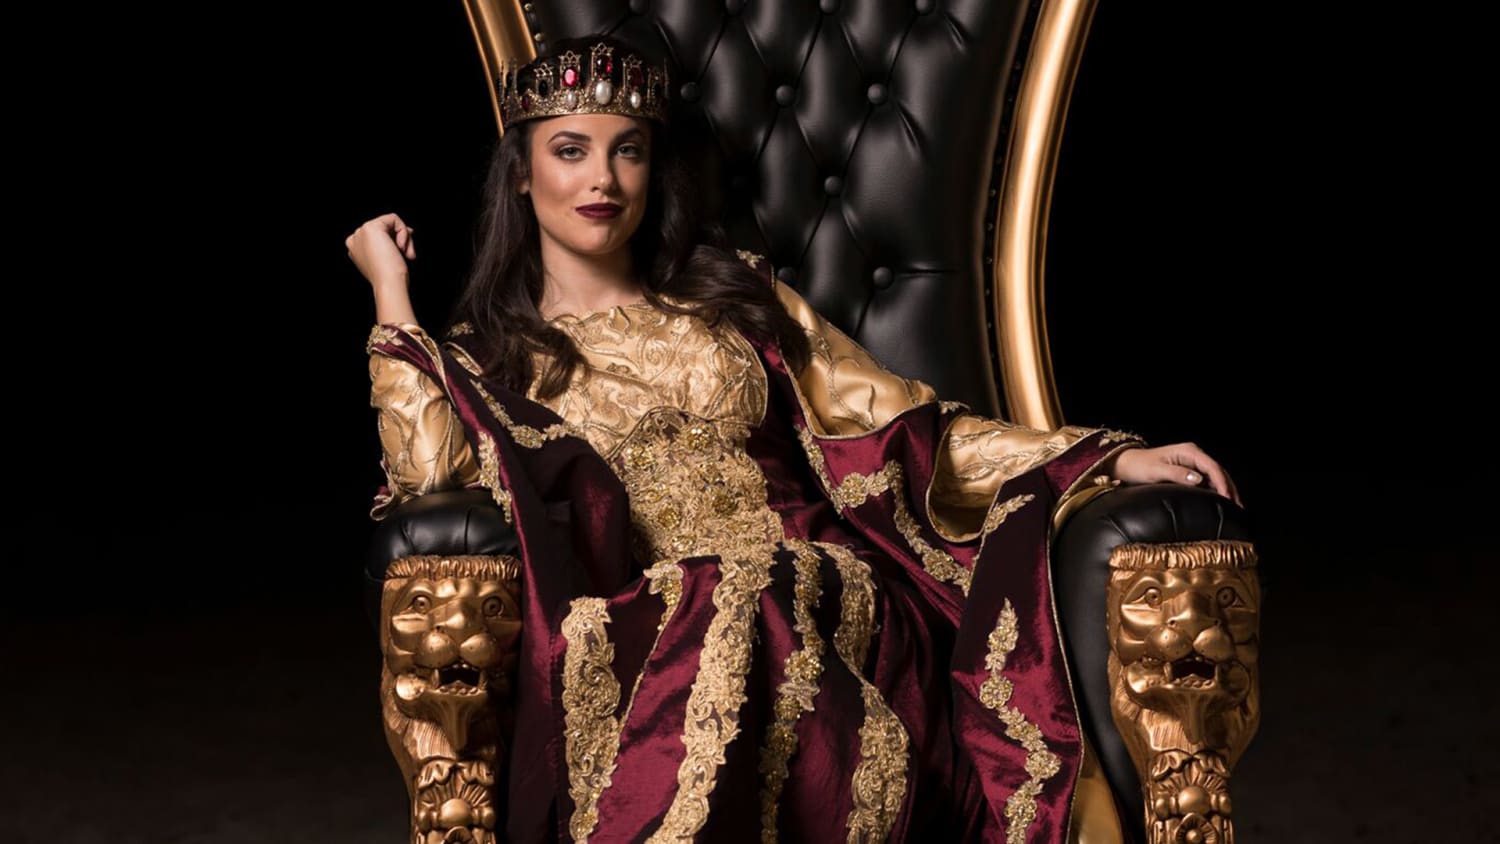 Medieval Times swaps kings for queens in new show - TODAY.com